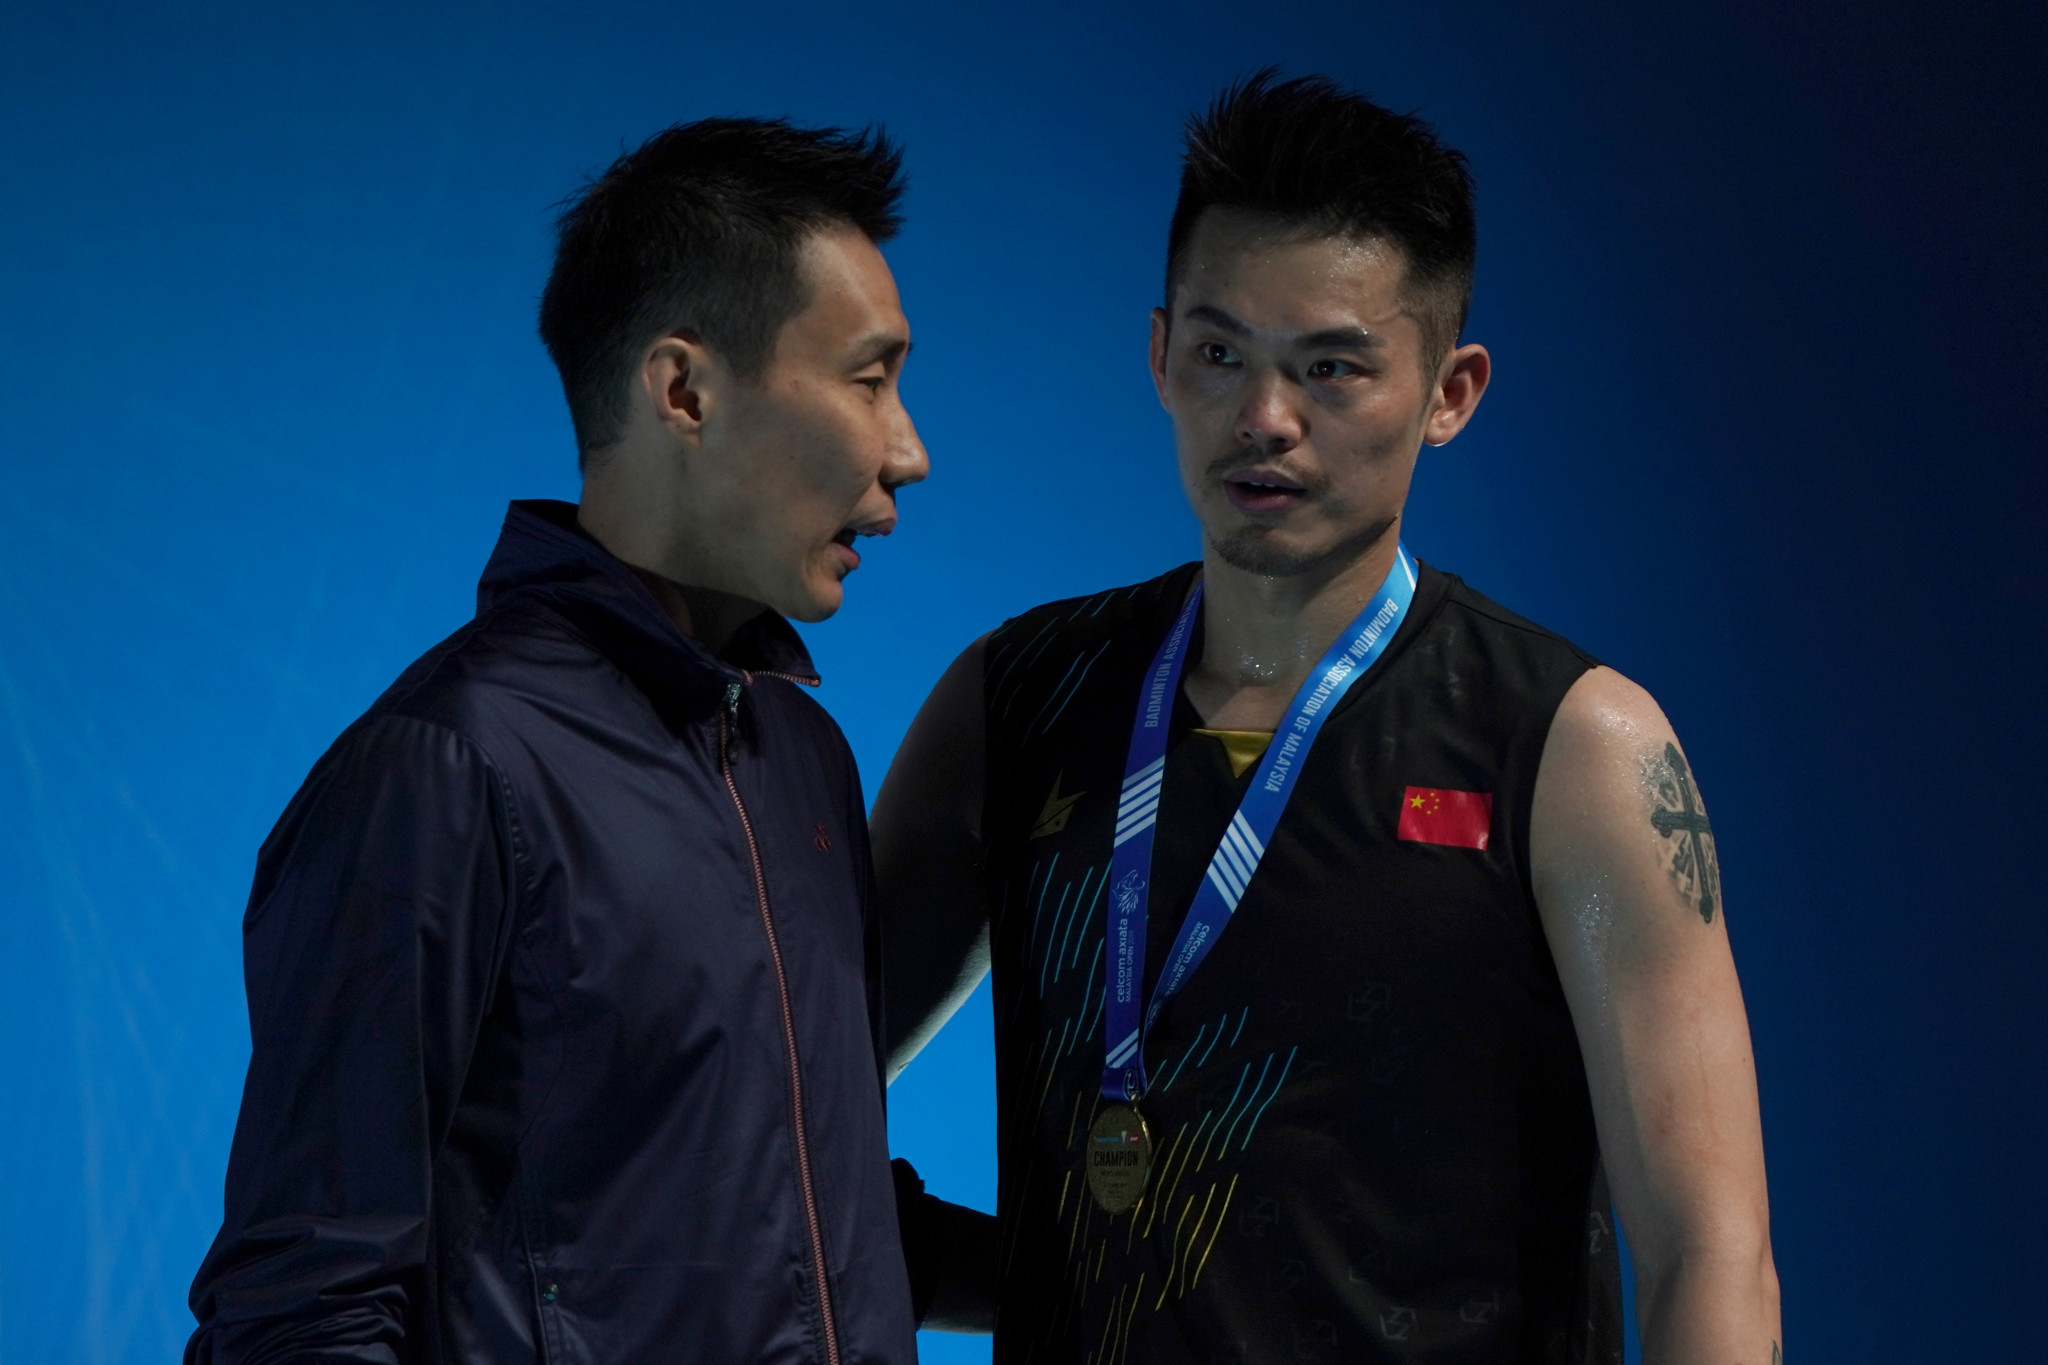 Lee Chong Wei, left and Lin Dan are to be inducted into the Badminton World Federation Hall of Fame ©Getty Images